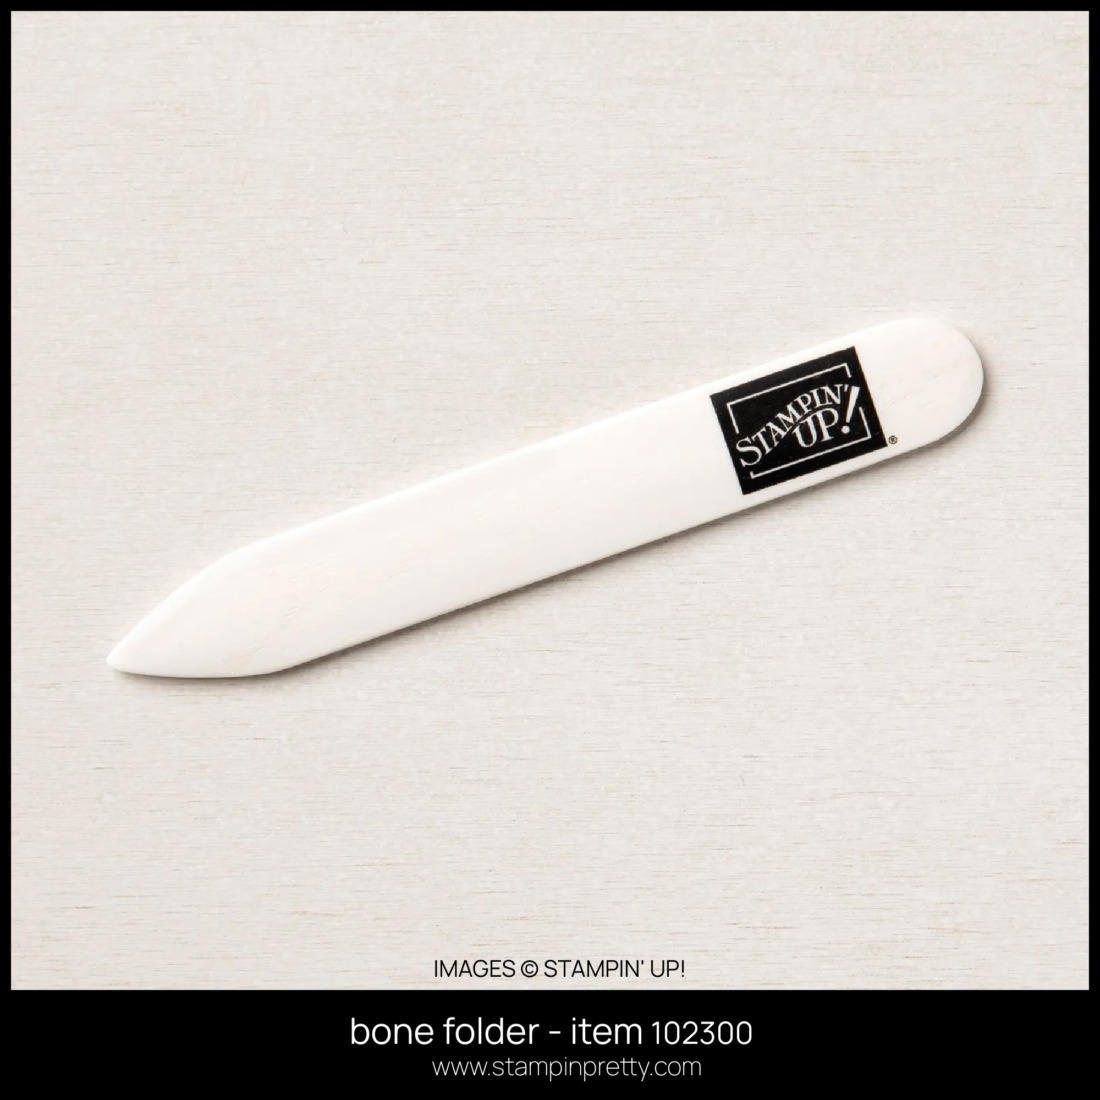 bone folder - item 102300 FROM STAMPIN' UP! ORDER FROM MARY FISH - STAMPIN' PRETTY - EARN TULIP LOYALTY REWARD